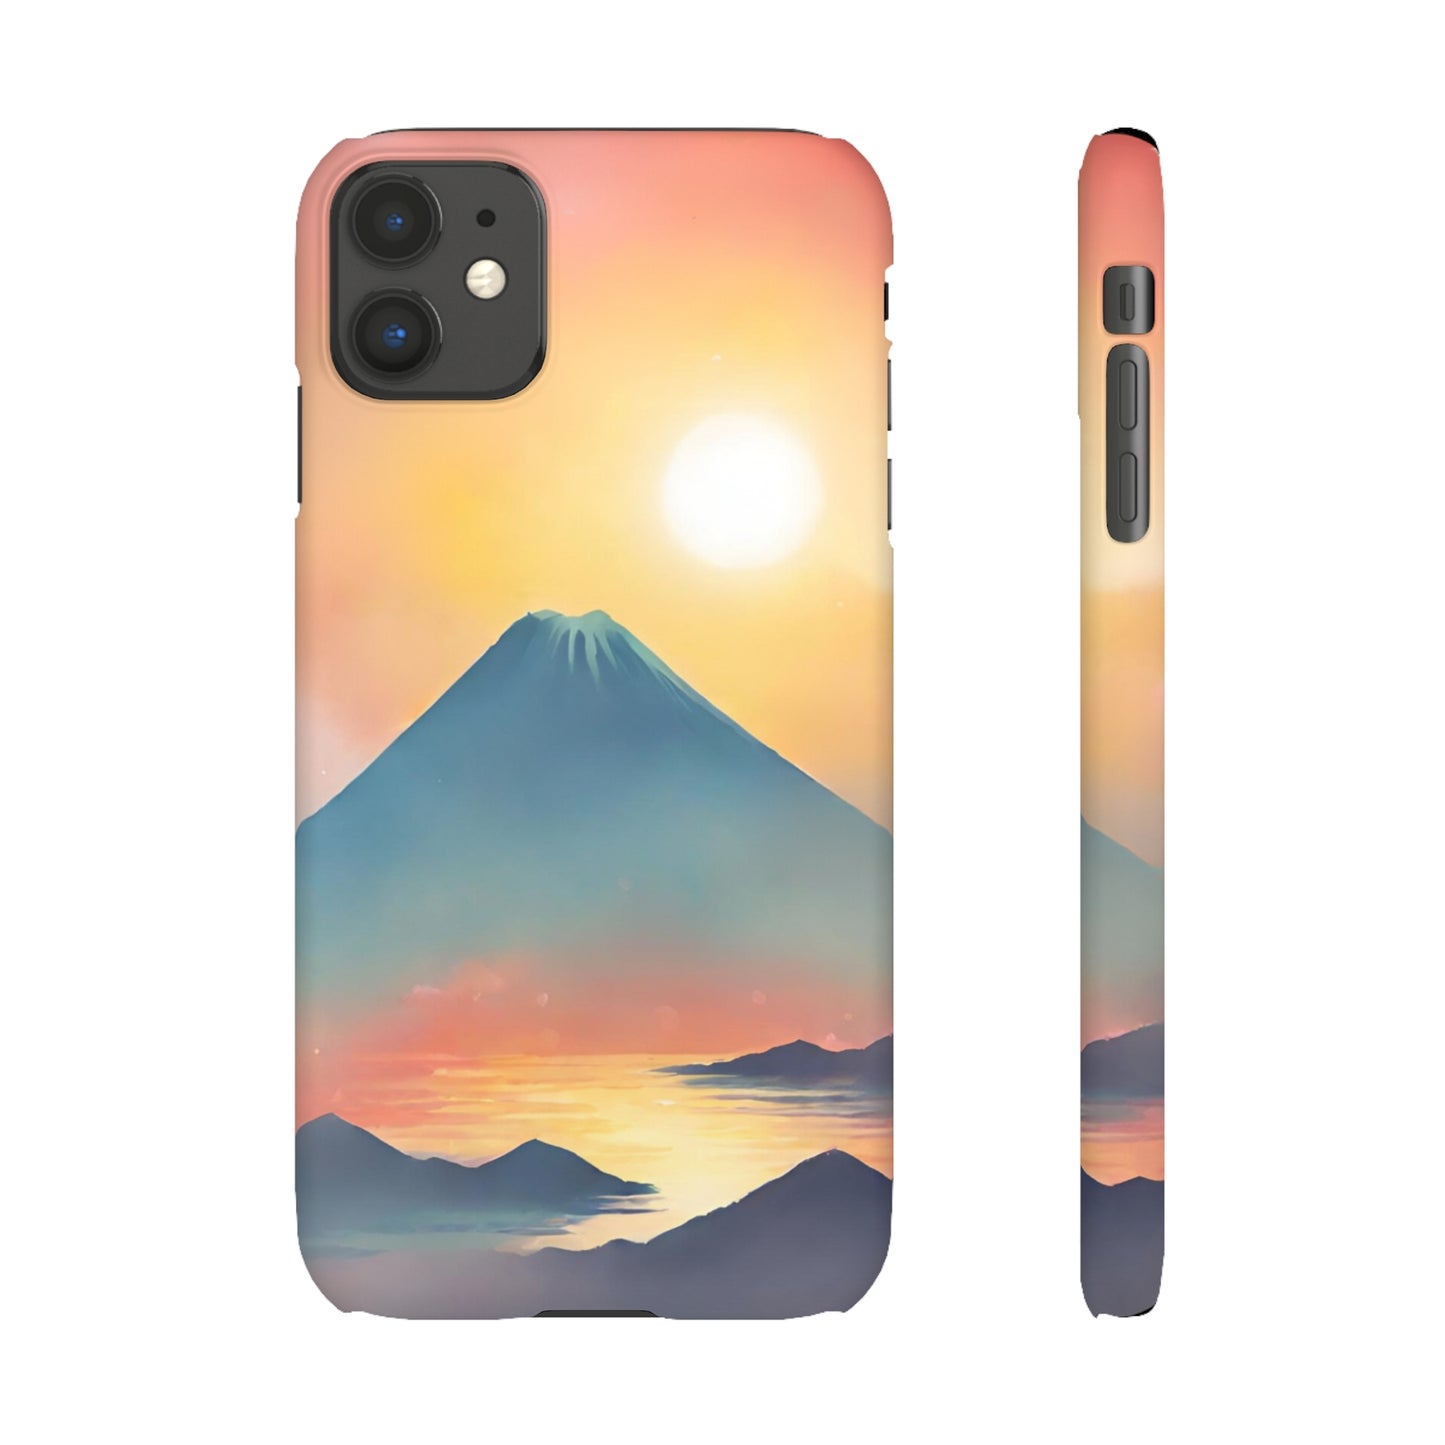 "Mountain Sunset" | Snap Cases